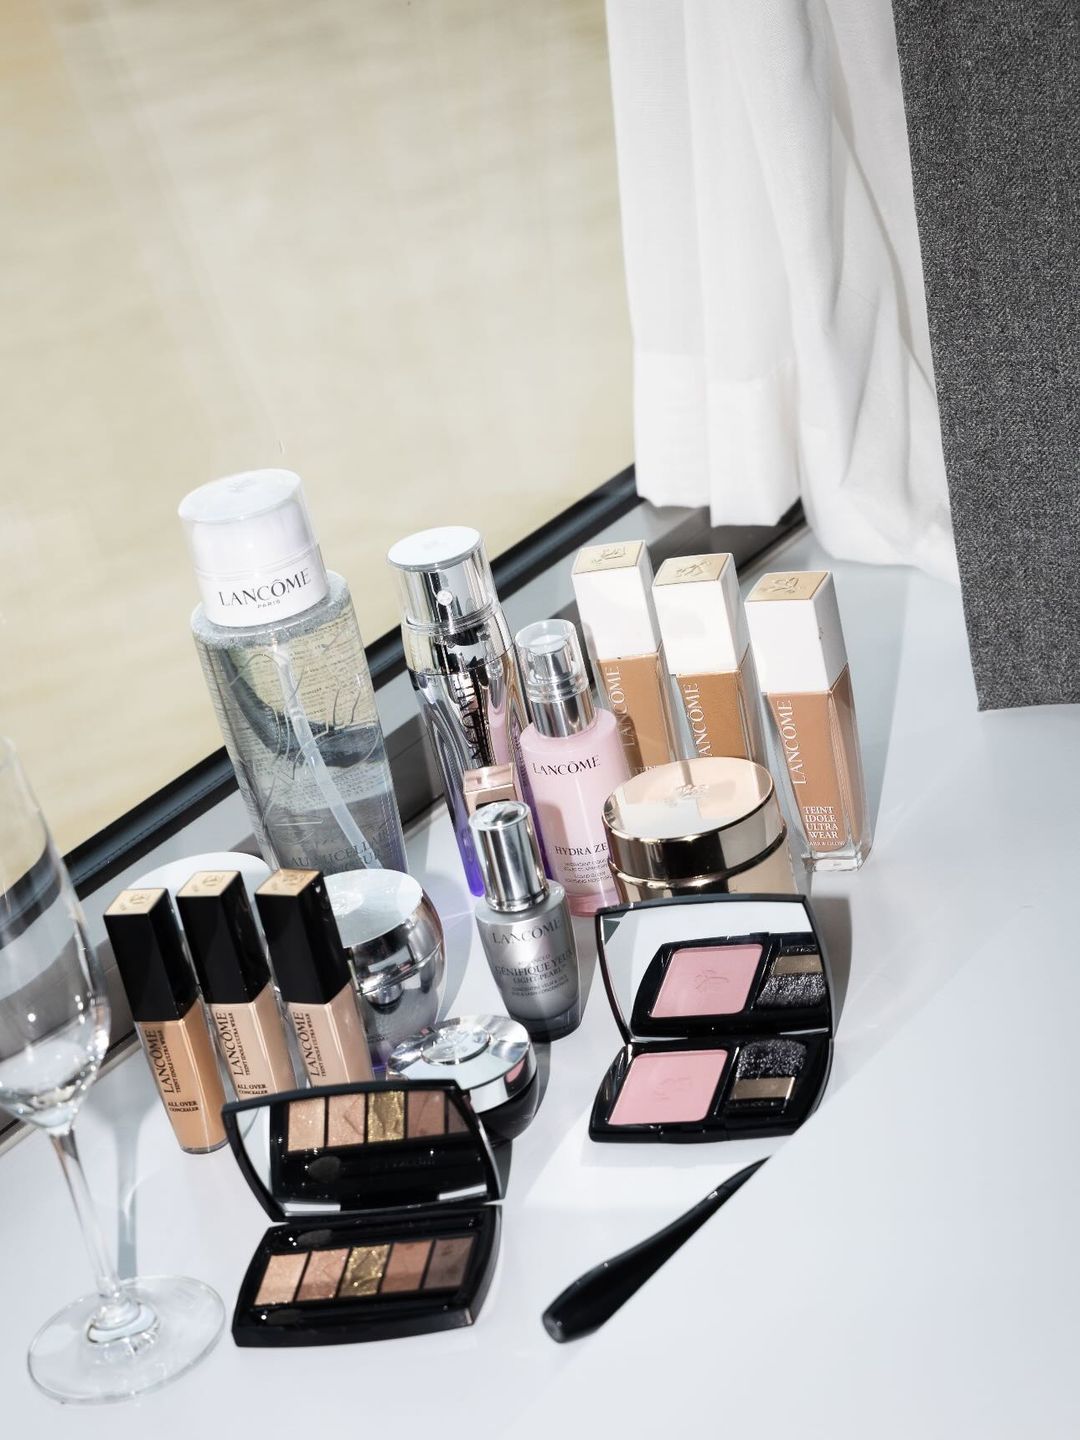 Malin relied on Lancôme to help Frankie get-red-carpet ready